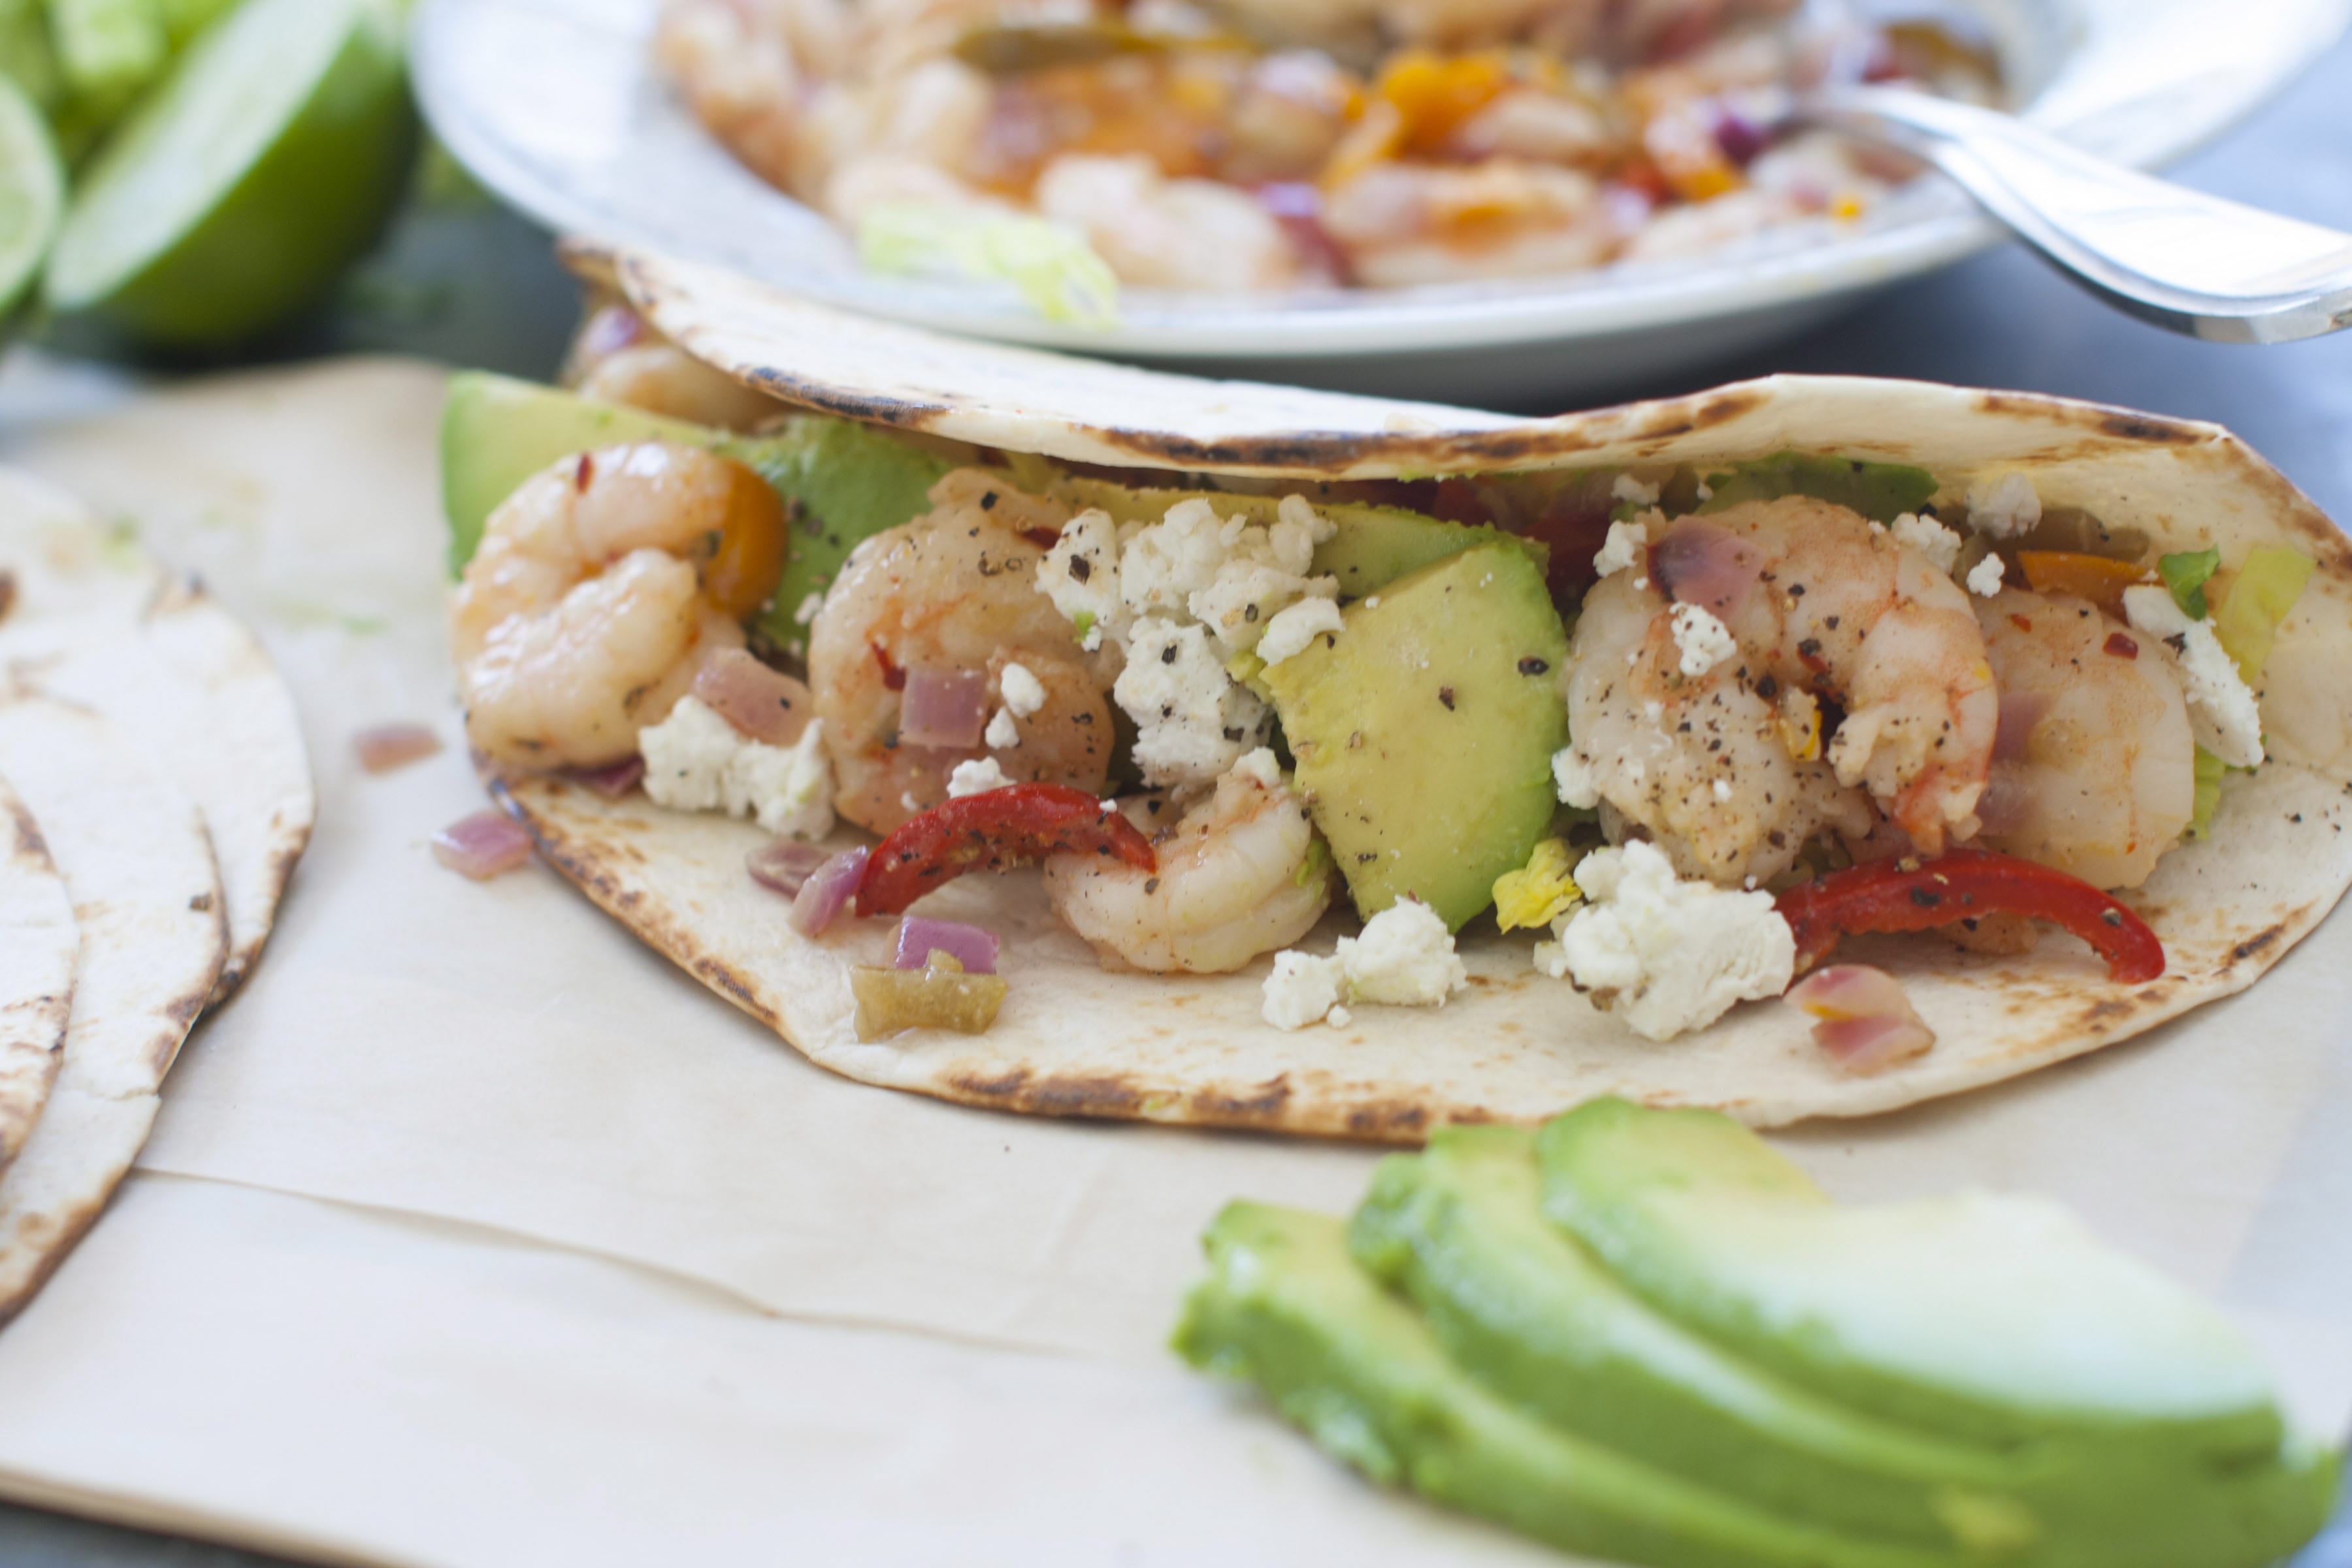 Sweet and tangy shrimp tacos are good comfort food that comes together with minimal fuss.